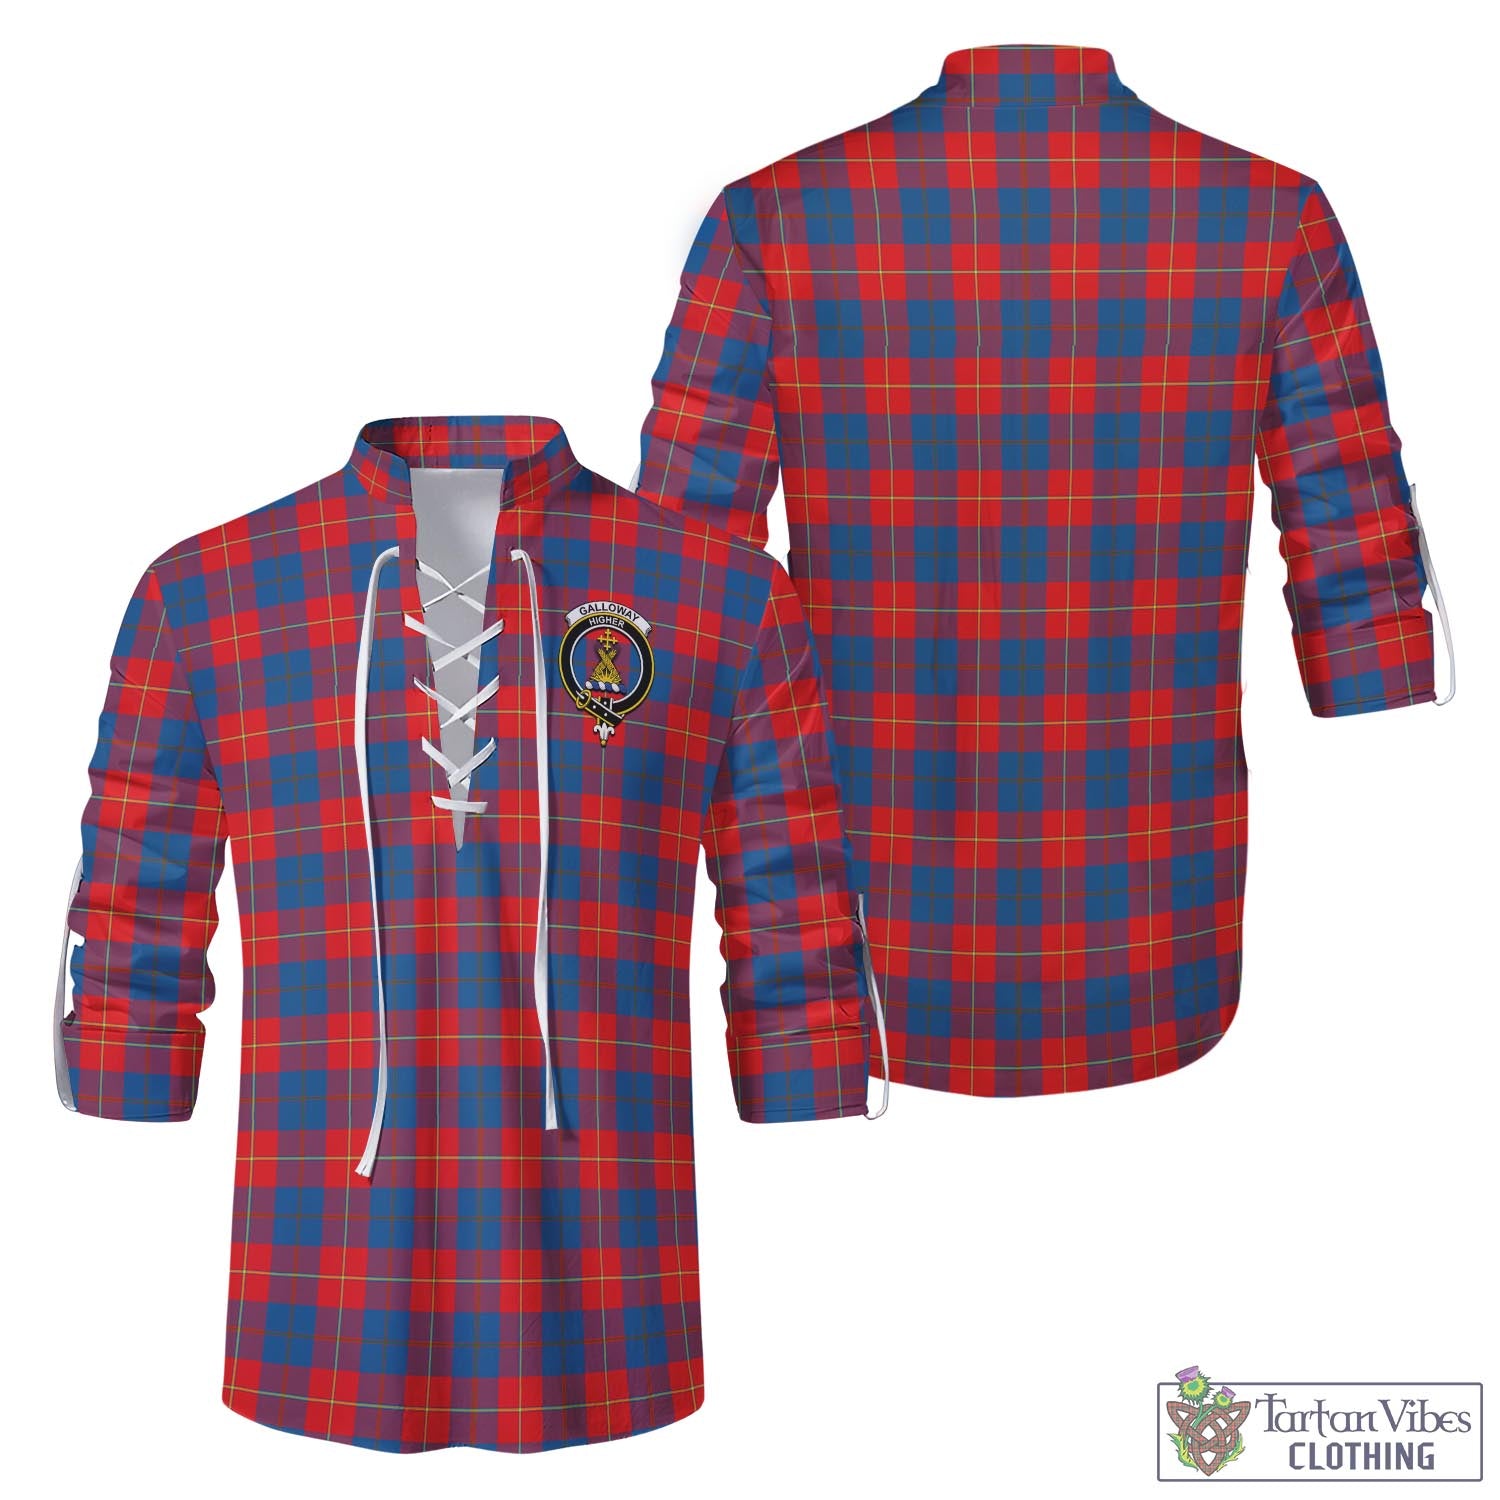 Tartan Vibes Clothing Galloway Red Tartan Men's Scottish Traditional Jacobite Ghillie Kilt Shirt with Family Crest